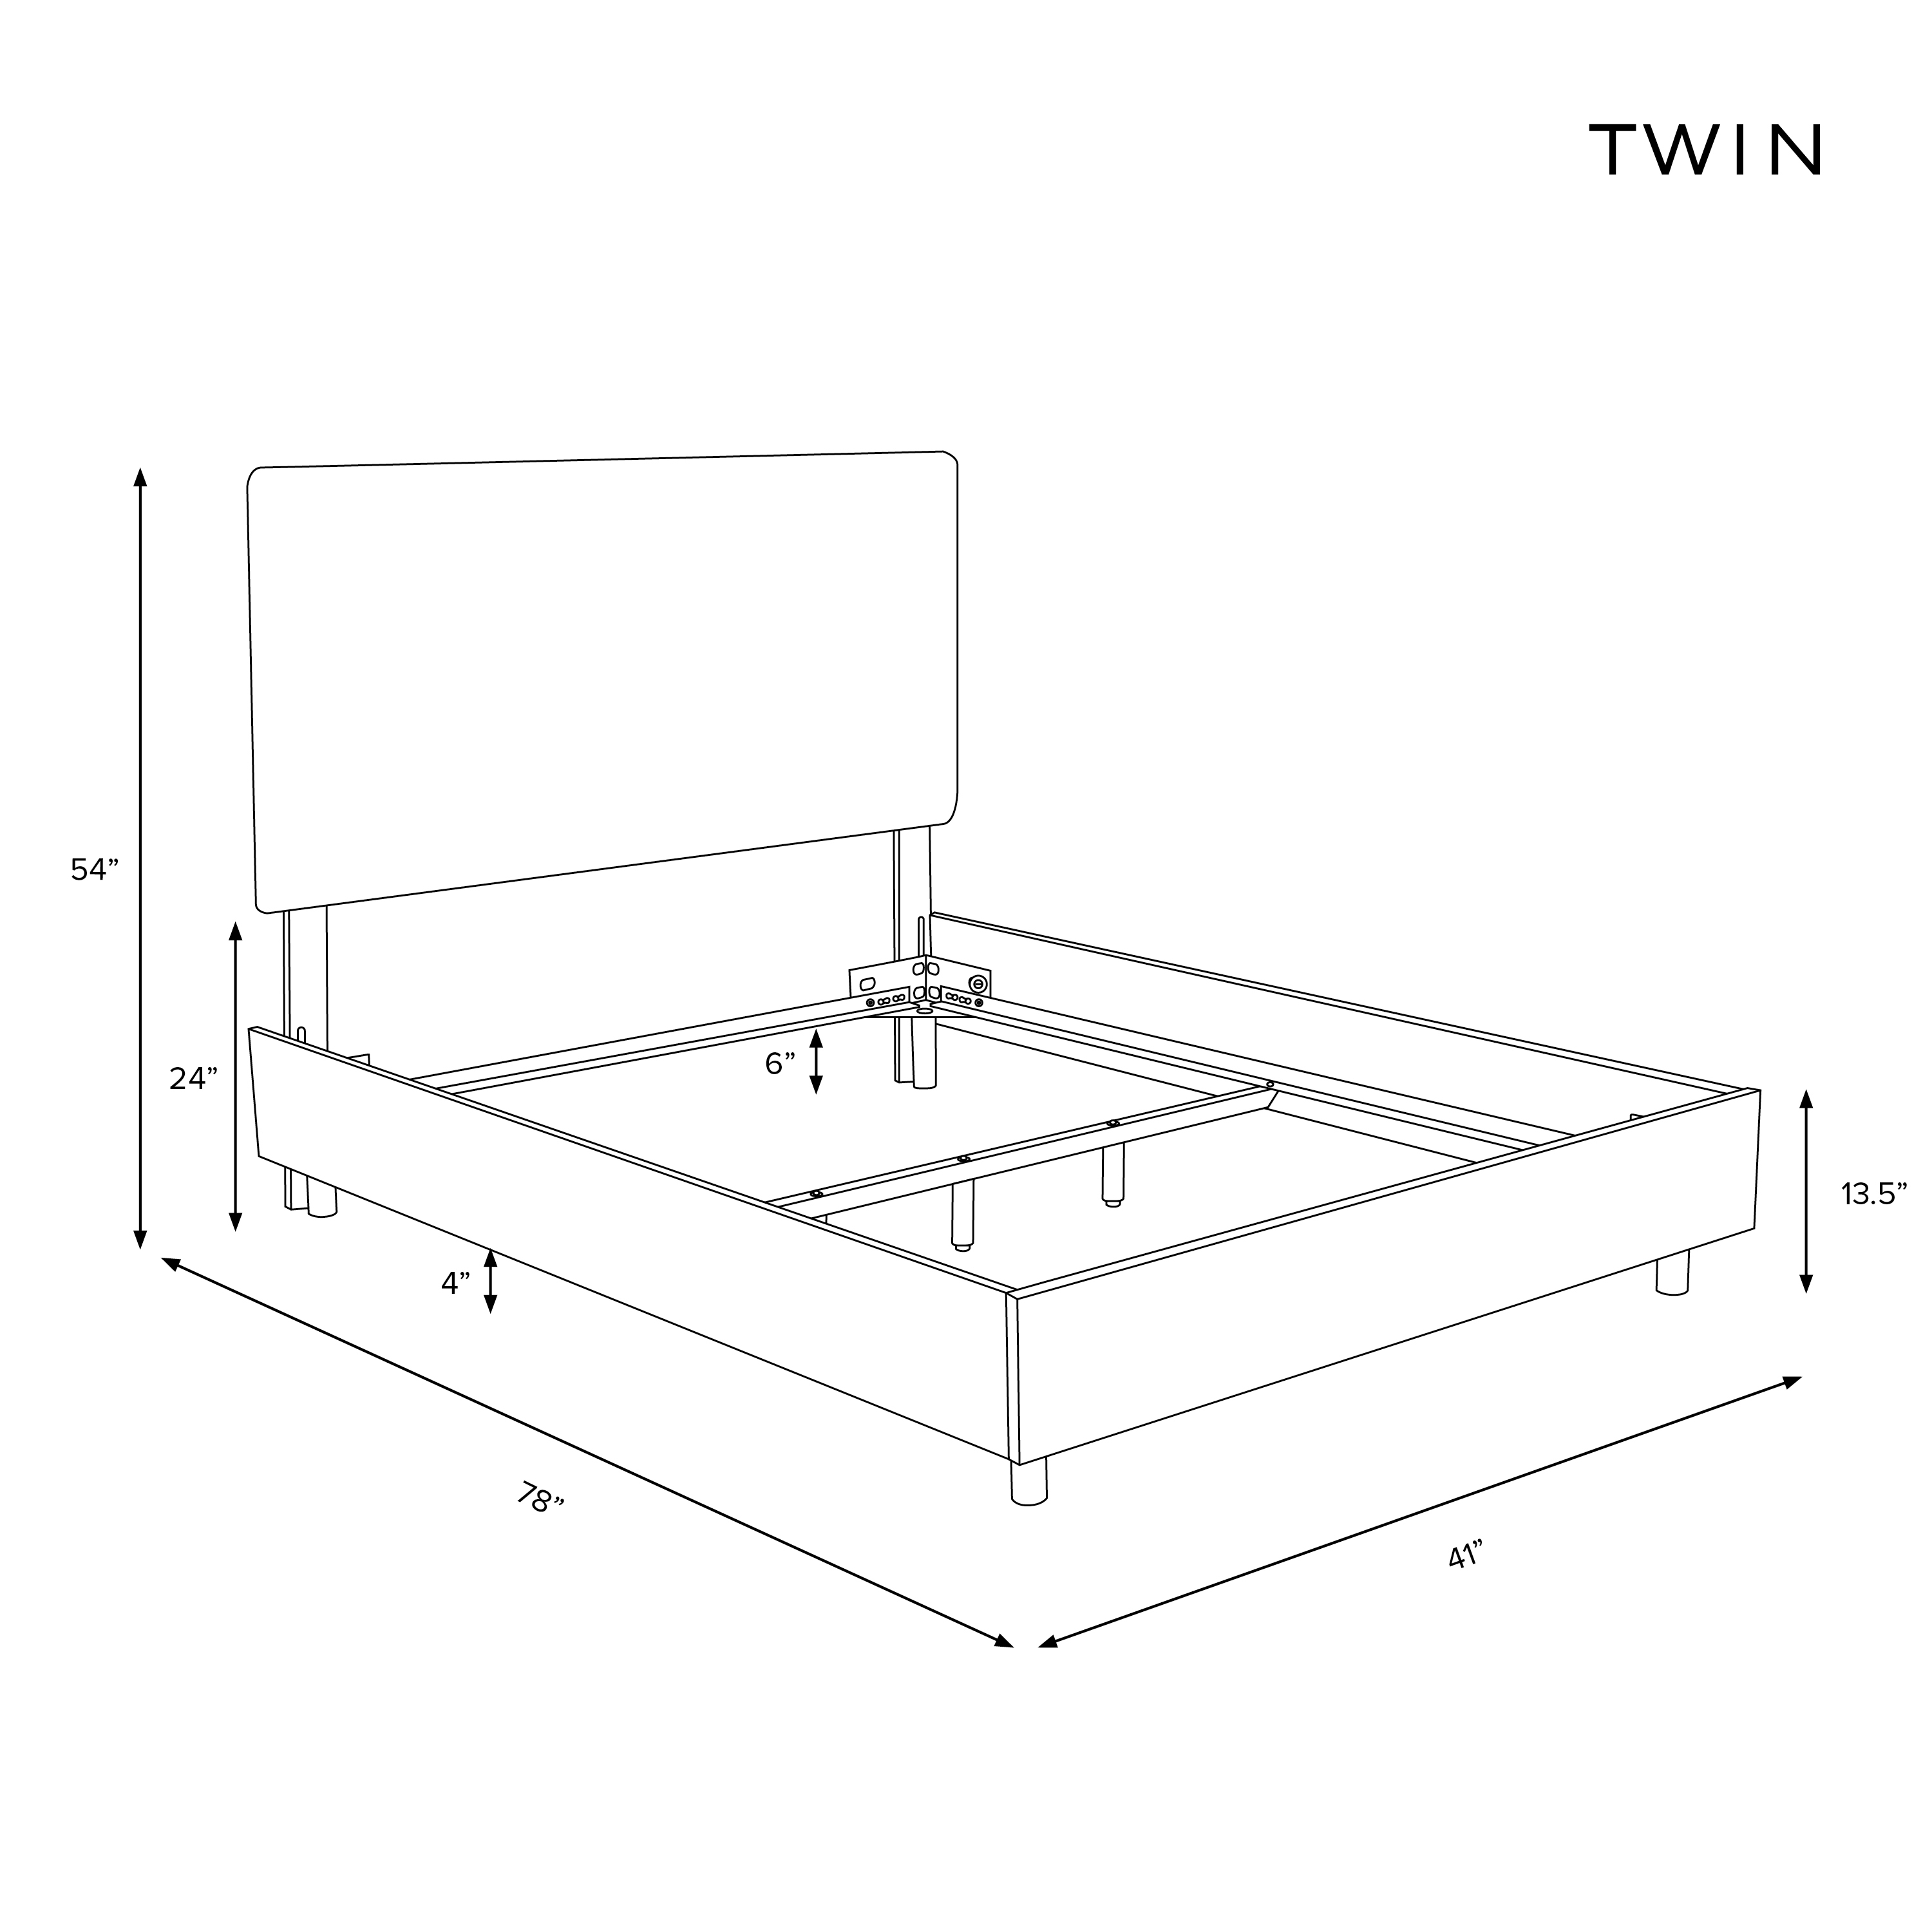 Lafayette Bed, Twin, White - Image 5